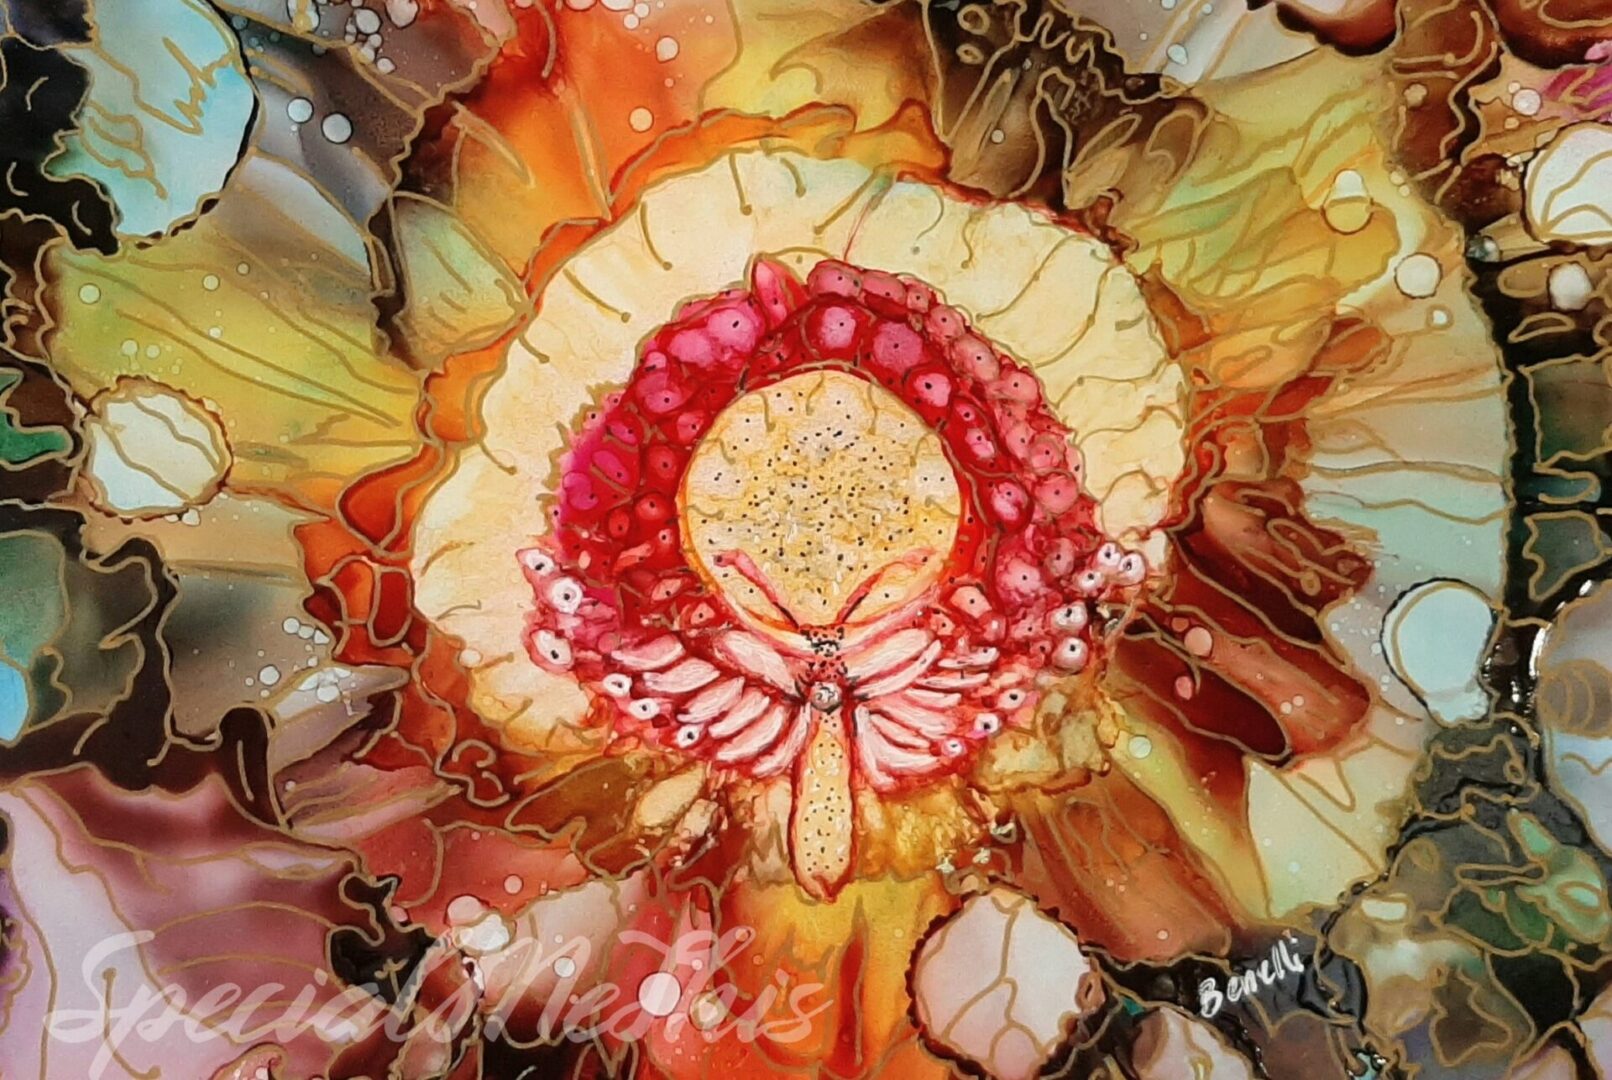 A painting of a butterfly in the center.